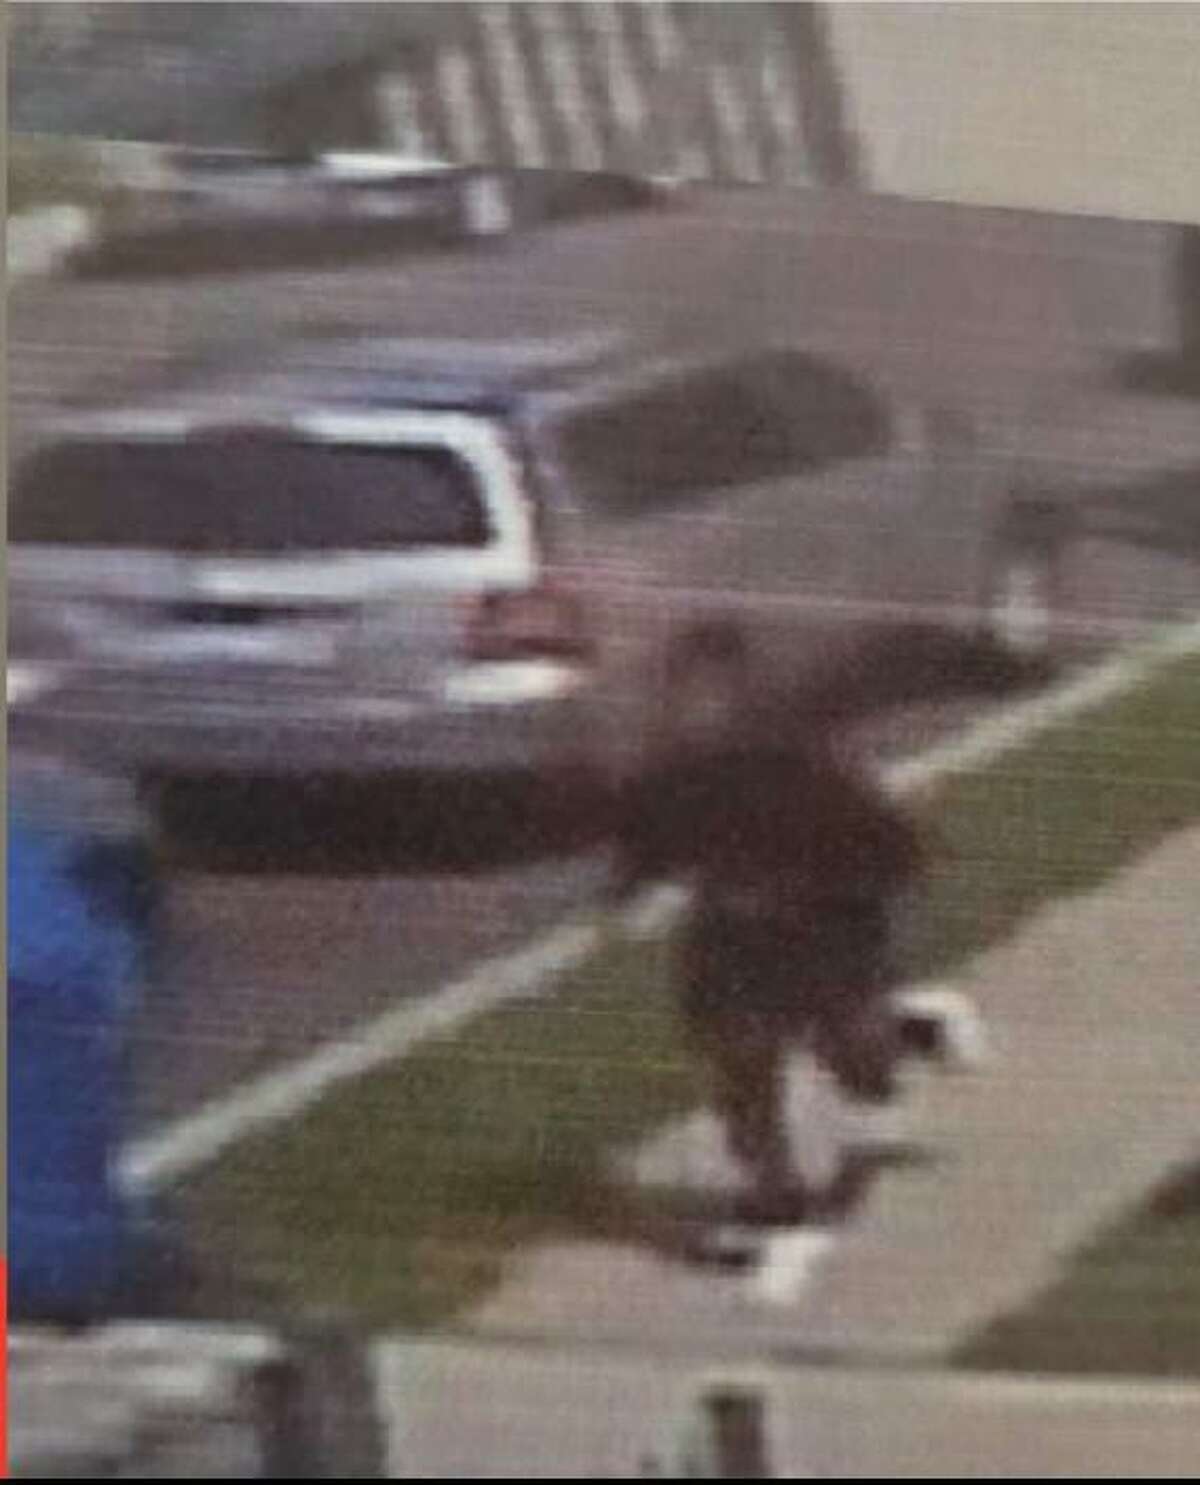 NORWALK, Conn. — Police released this image from a surveillance camera in a stabbing incident that occurred at Norwalk Hospital on June 5, 2021.